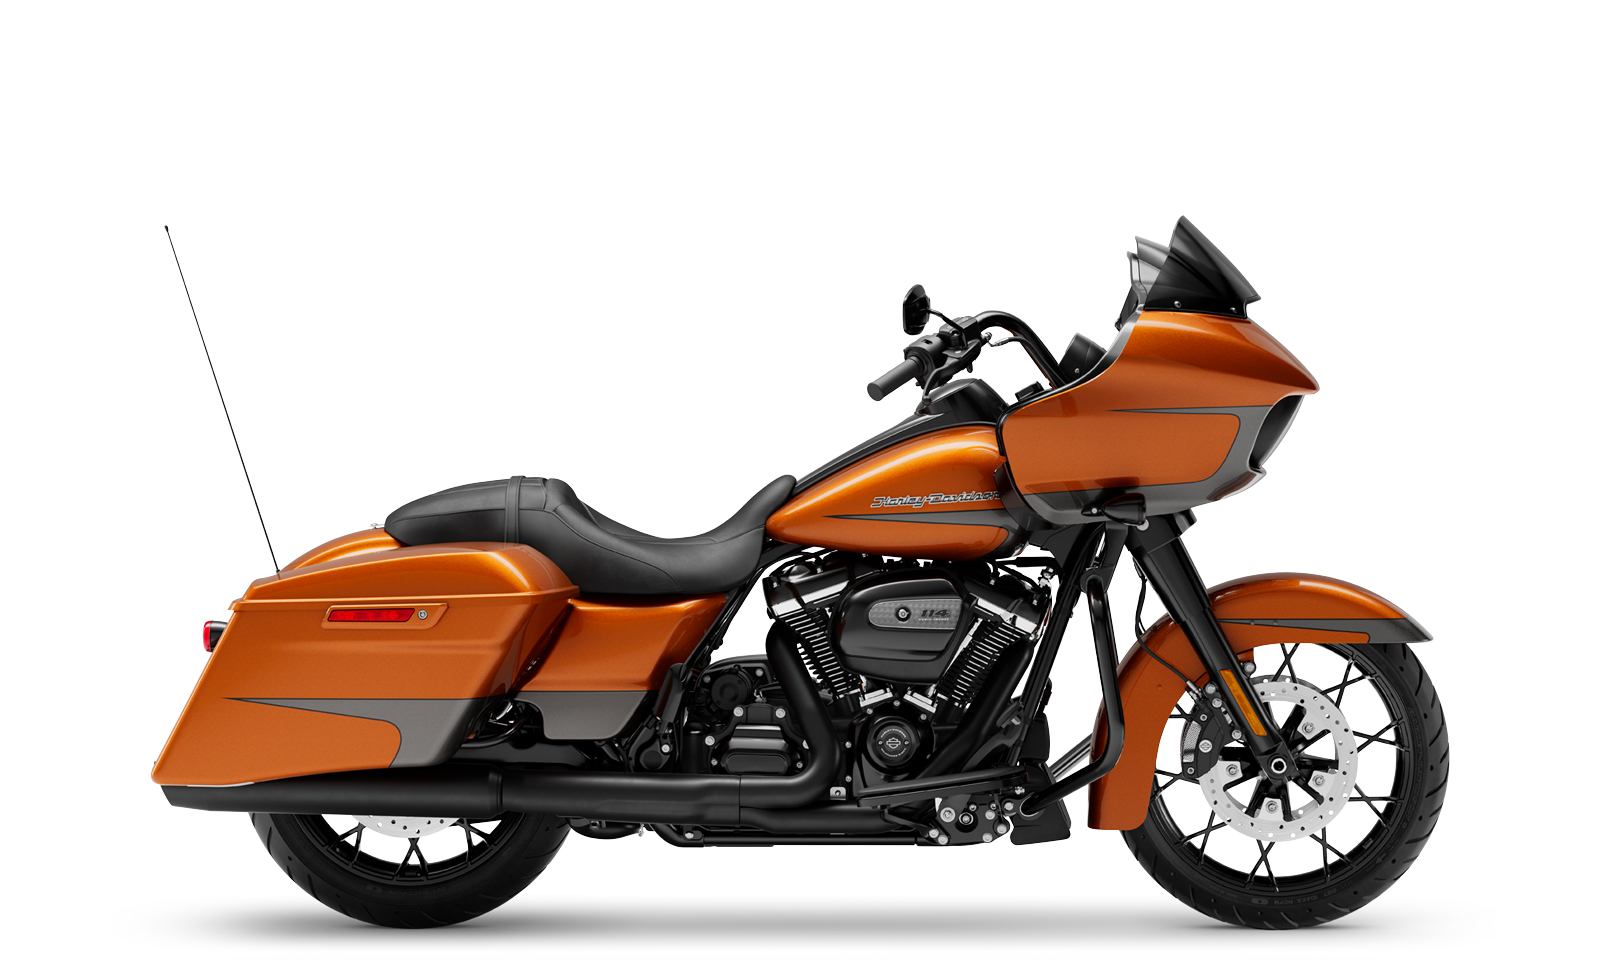 2020 Road Glide Special Motorcycle Harley Davidson Usa